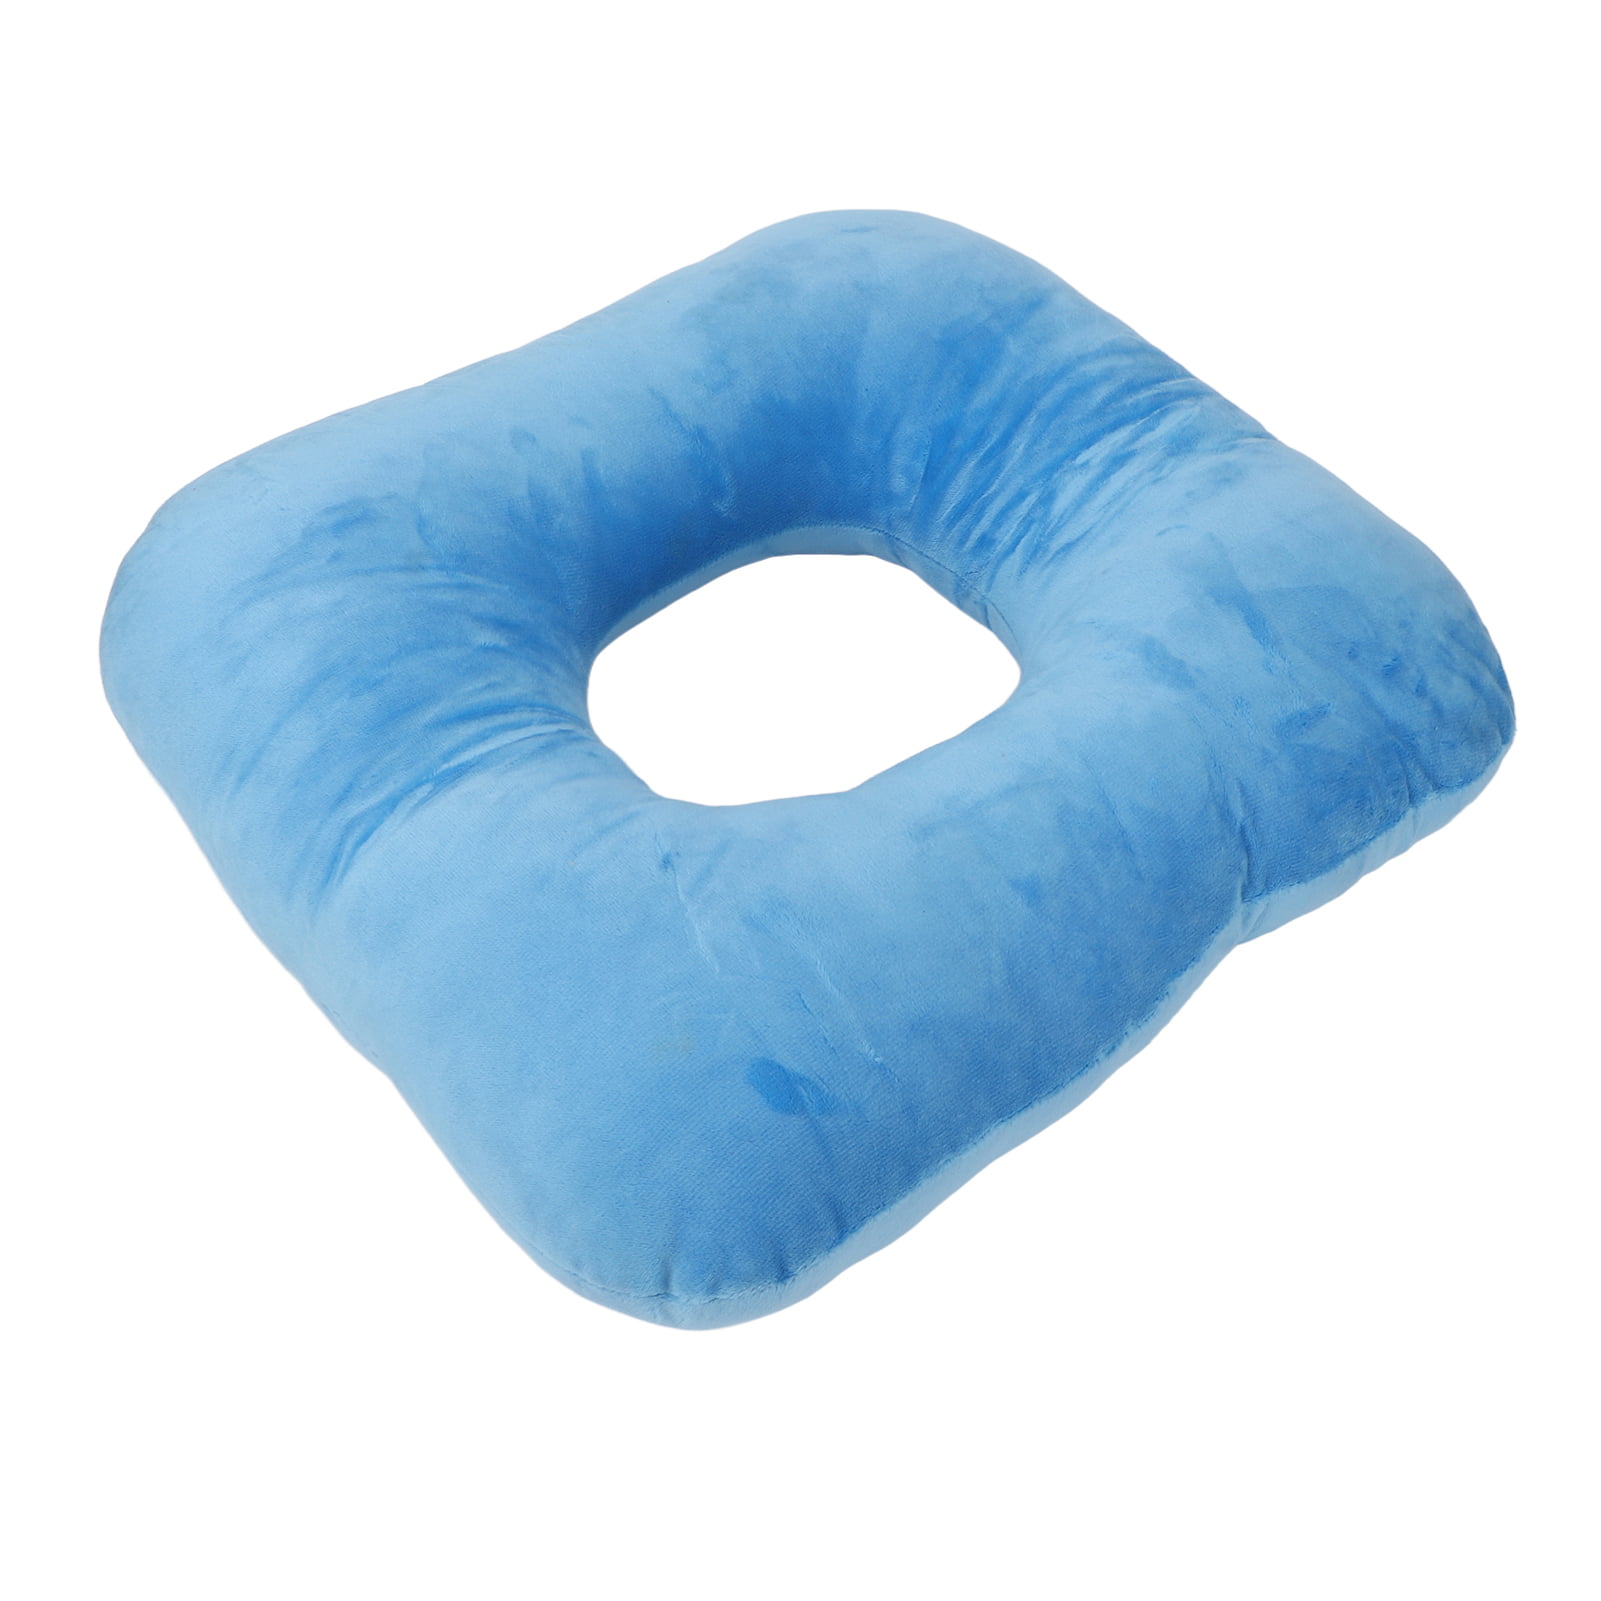 DMI Hemmorhoid Cushion for Pressure Sores, Bed Sore Seat Cushion, Donut  Pillow for Pregnancy, Foam Ring Cushion for Sitting, Convoluted Pillow,  Medical Cushion,…